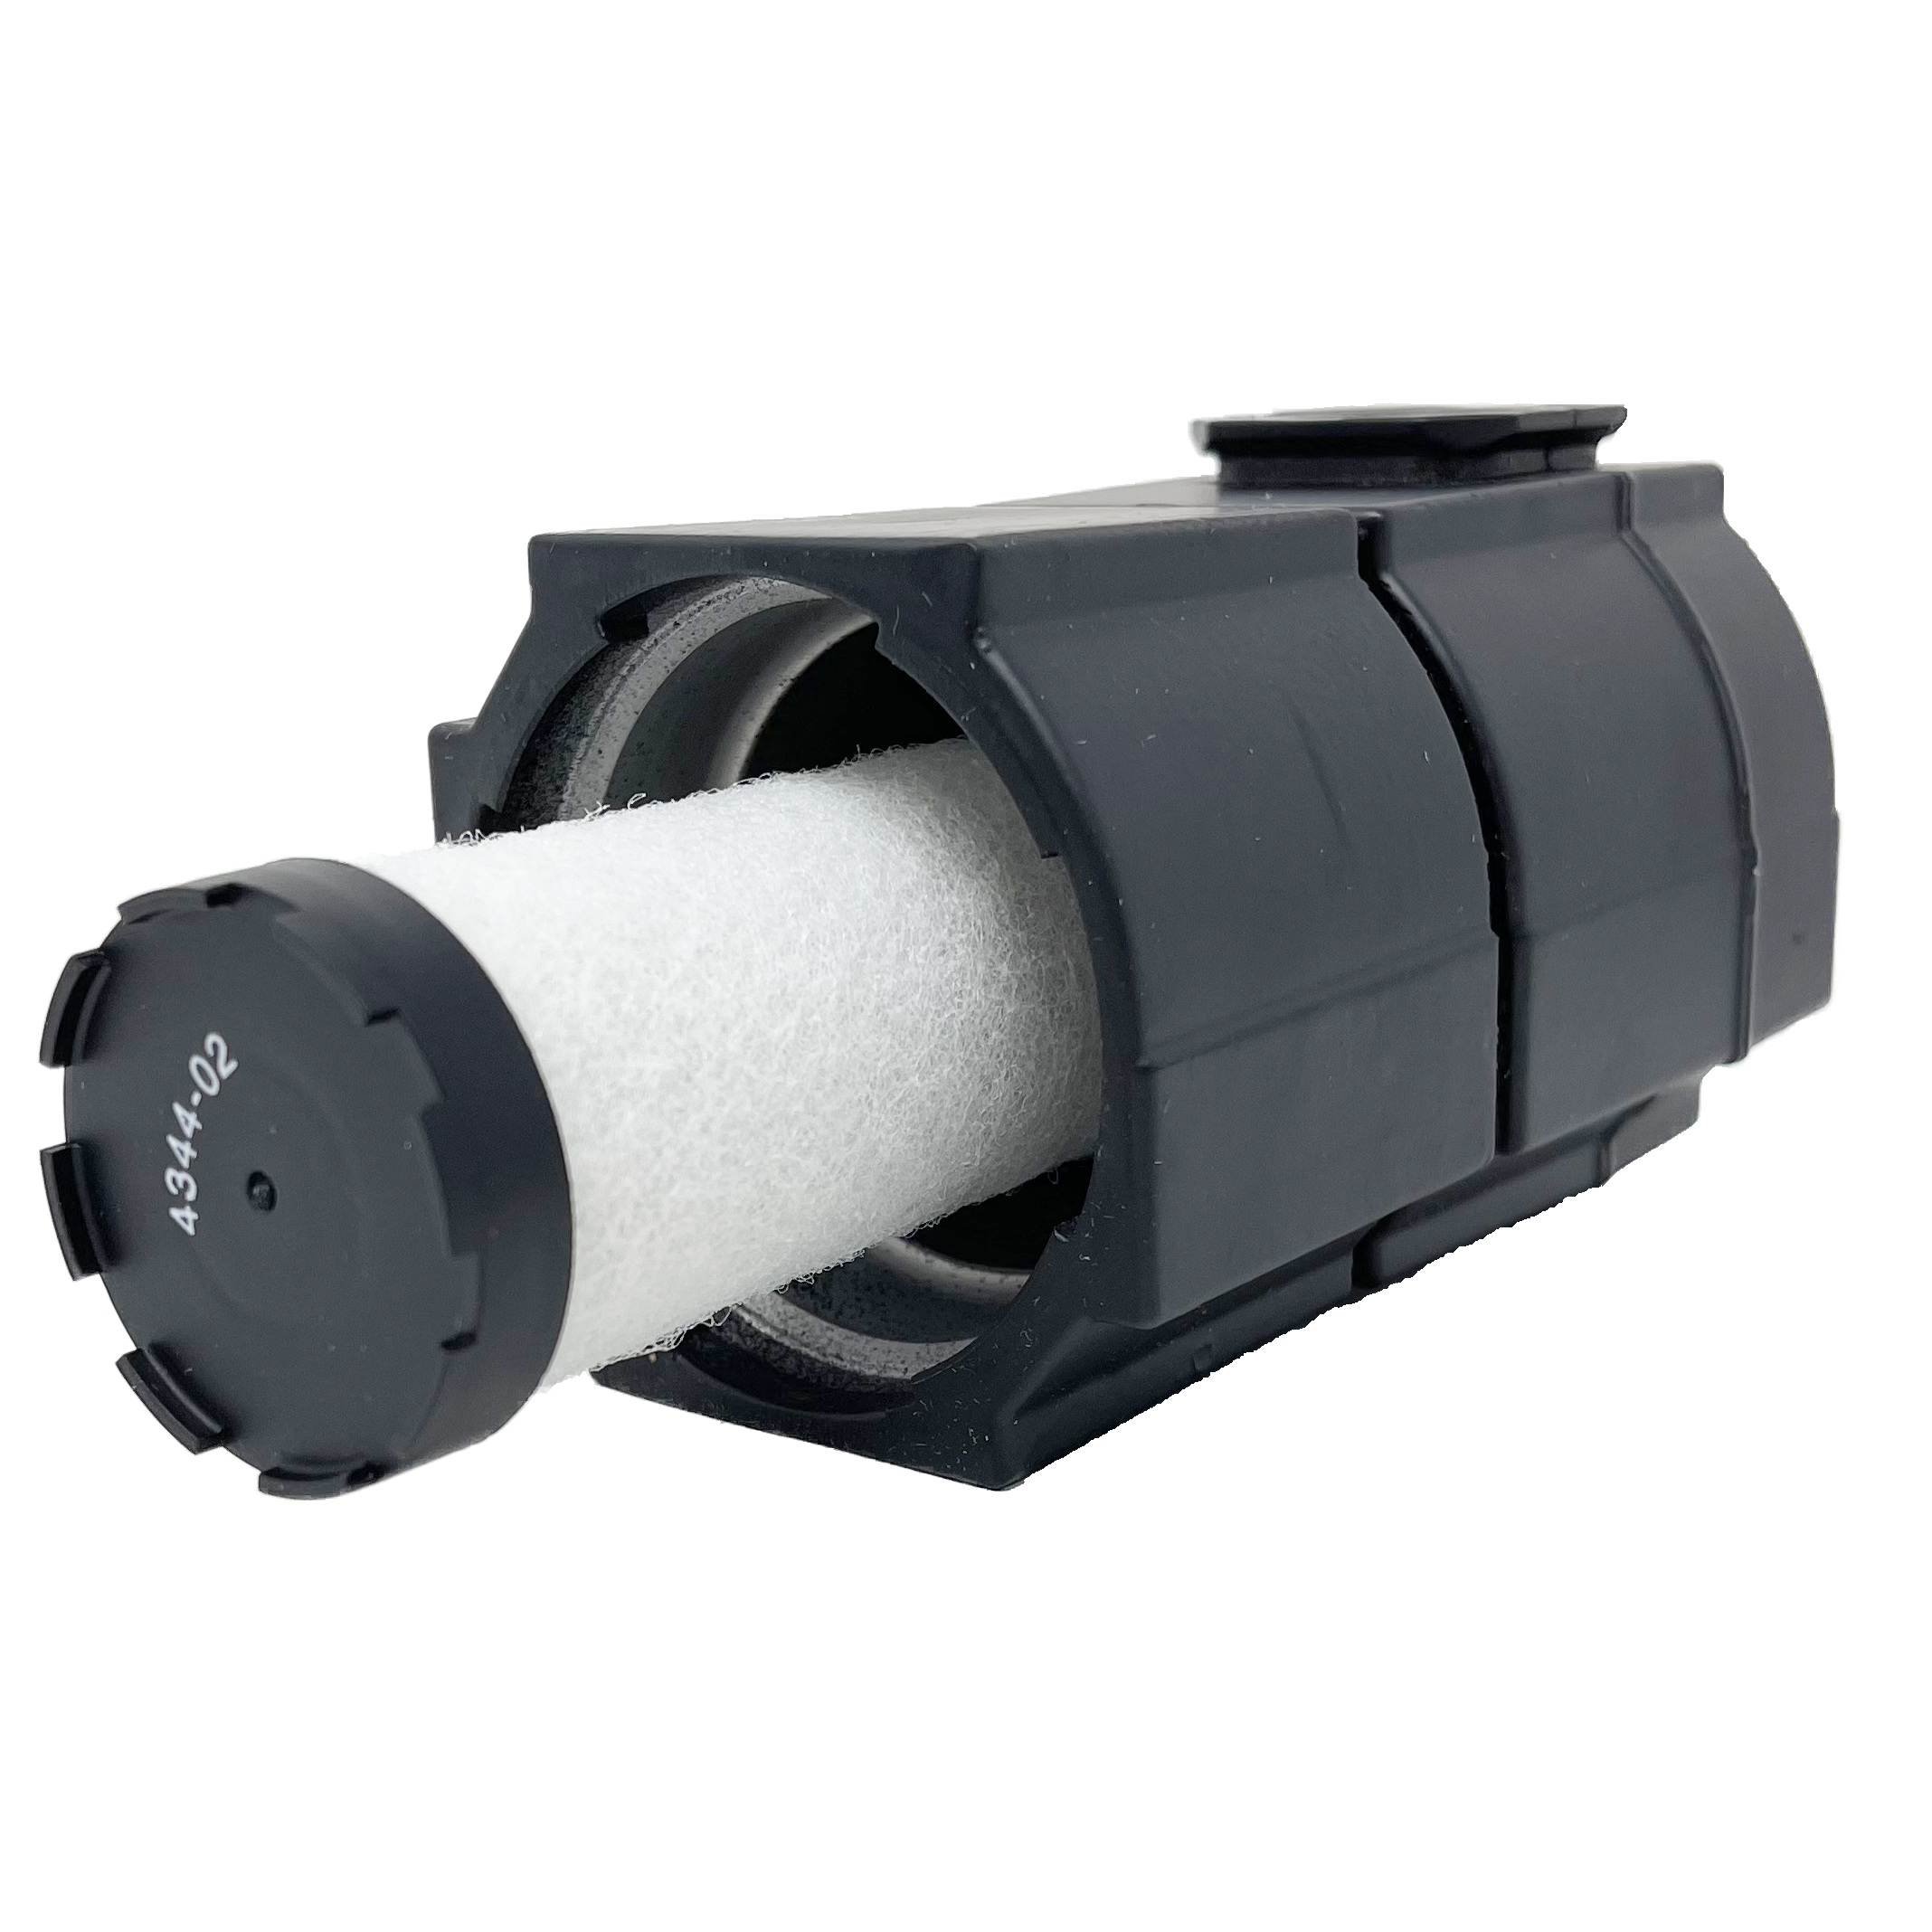 F74H-4AD-AD0 : Norgren Excelon Hi-Flow Coalescing Filter, 1/2" NPT, With Mechanical Indicator, Auto Drain, Metal Bowl